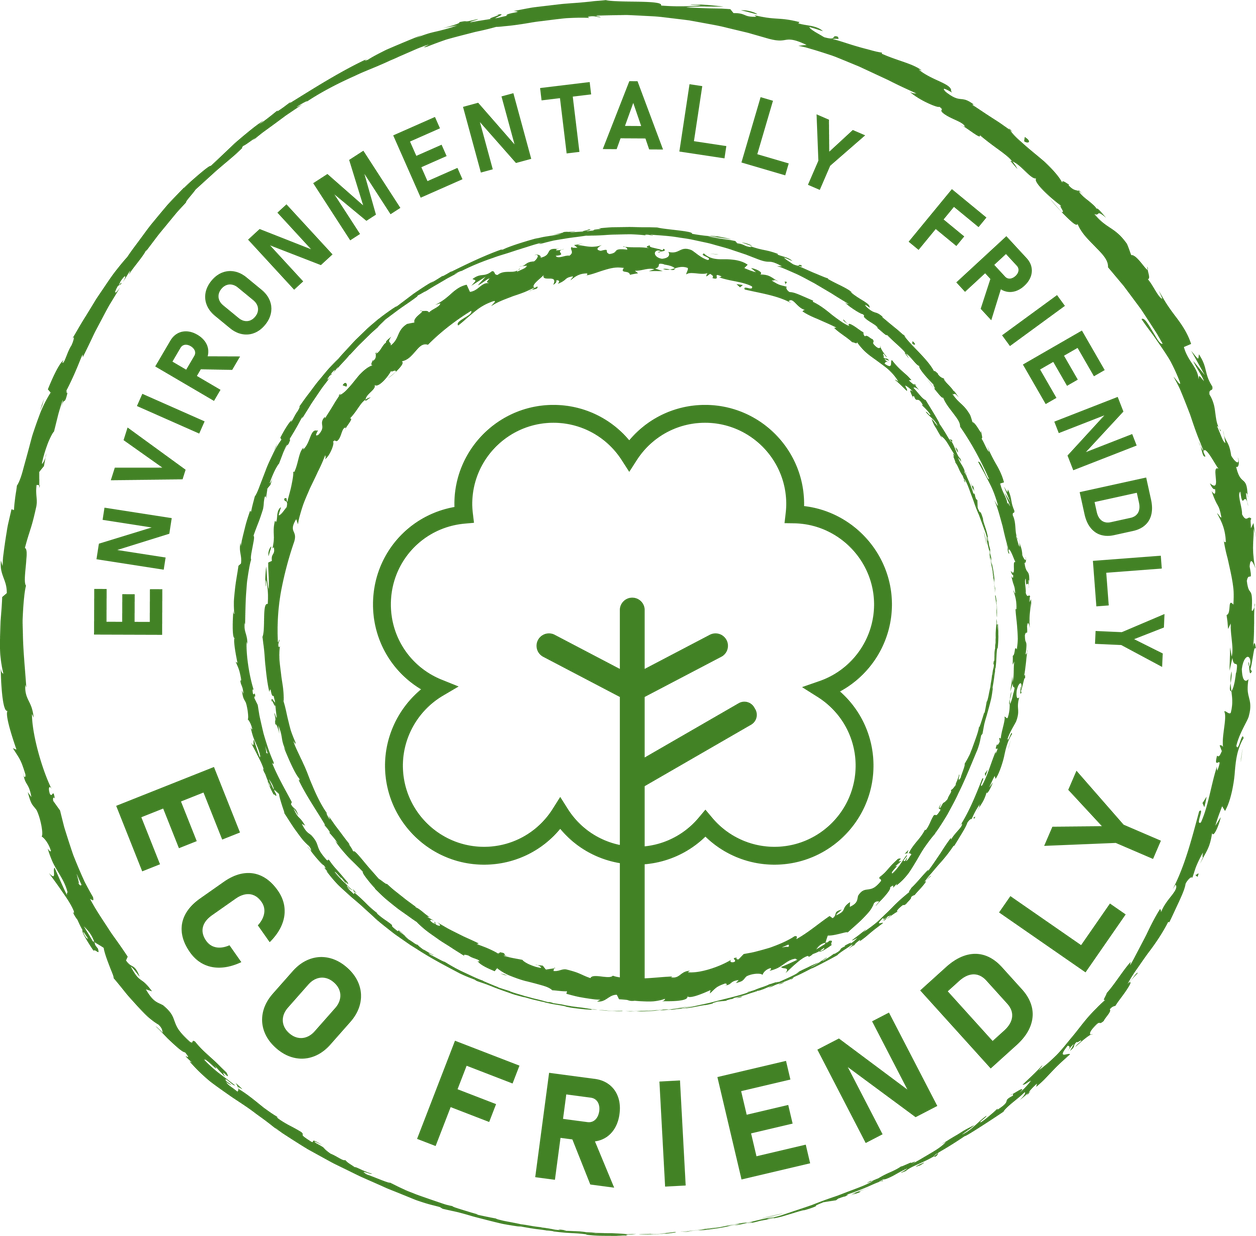 Eco friendly environmentally friendly ecological green stamp label sticker tag